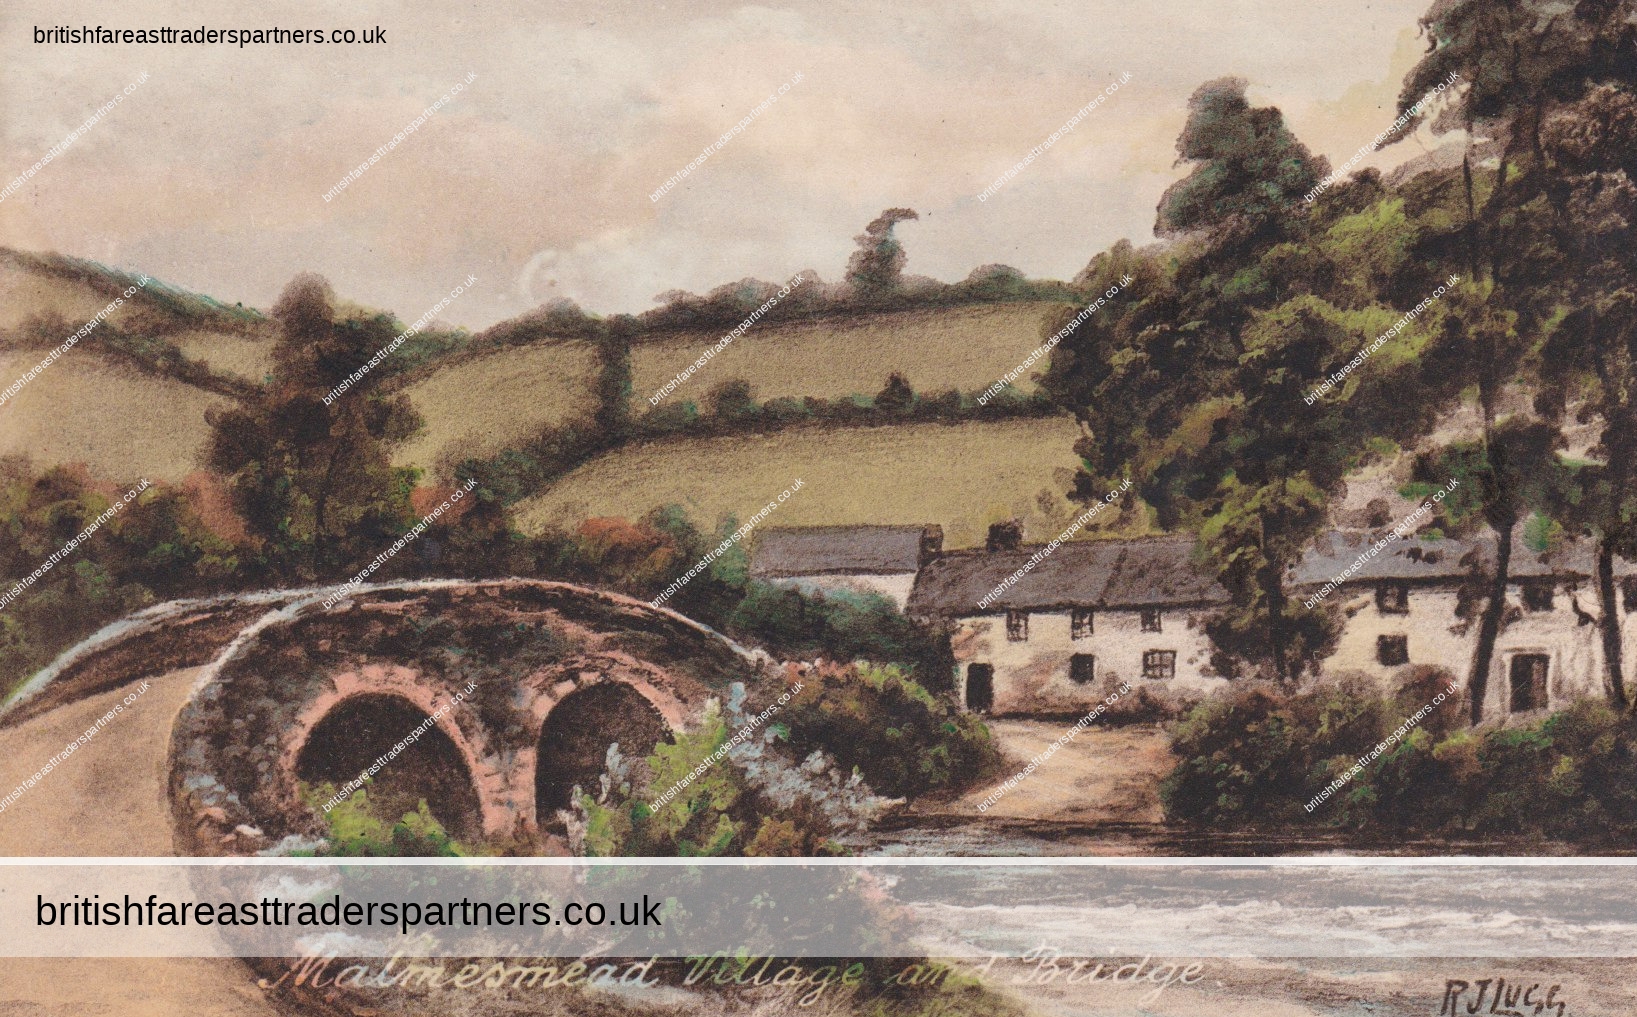 VINTAGE COLLECTABLE POSTCARD “MALMESMEAD VILLAGE AND BRIDGE” INN NOW OPERATING AS LORNA DOONE INN ENGLAND, UNITED KINGDOM TOPOGRAPHICAL POSTCARDS | ART POSTCARDS BRITISH | COUNTRYSIDE | COTTAGES | VILLAGES |  NATURE | TOURISM HISTORY | CULTURE  | HERITAGE | LIFESTYLE